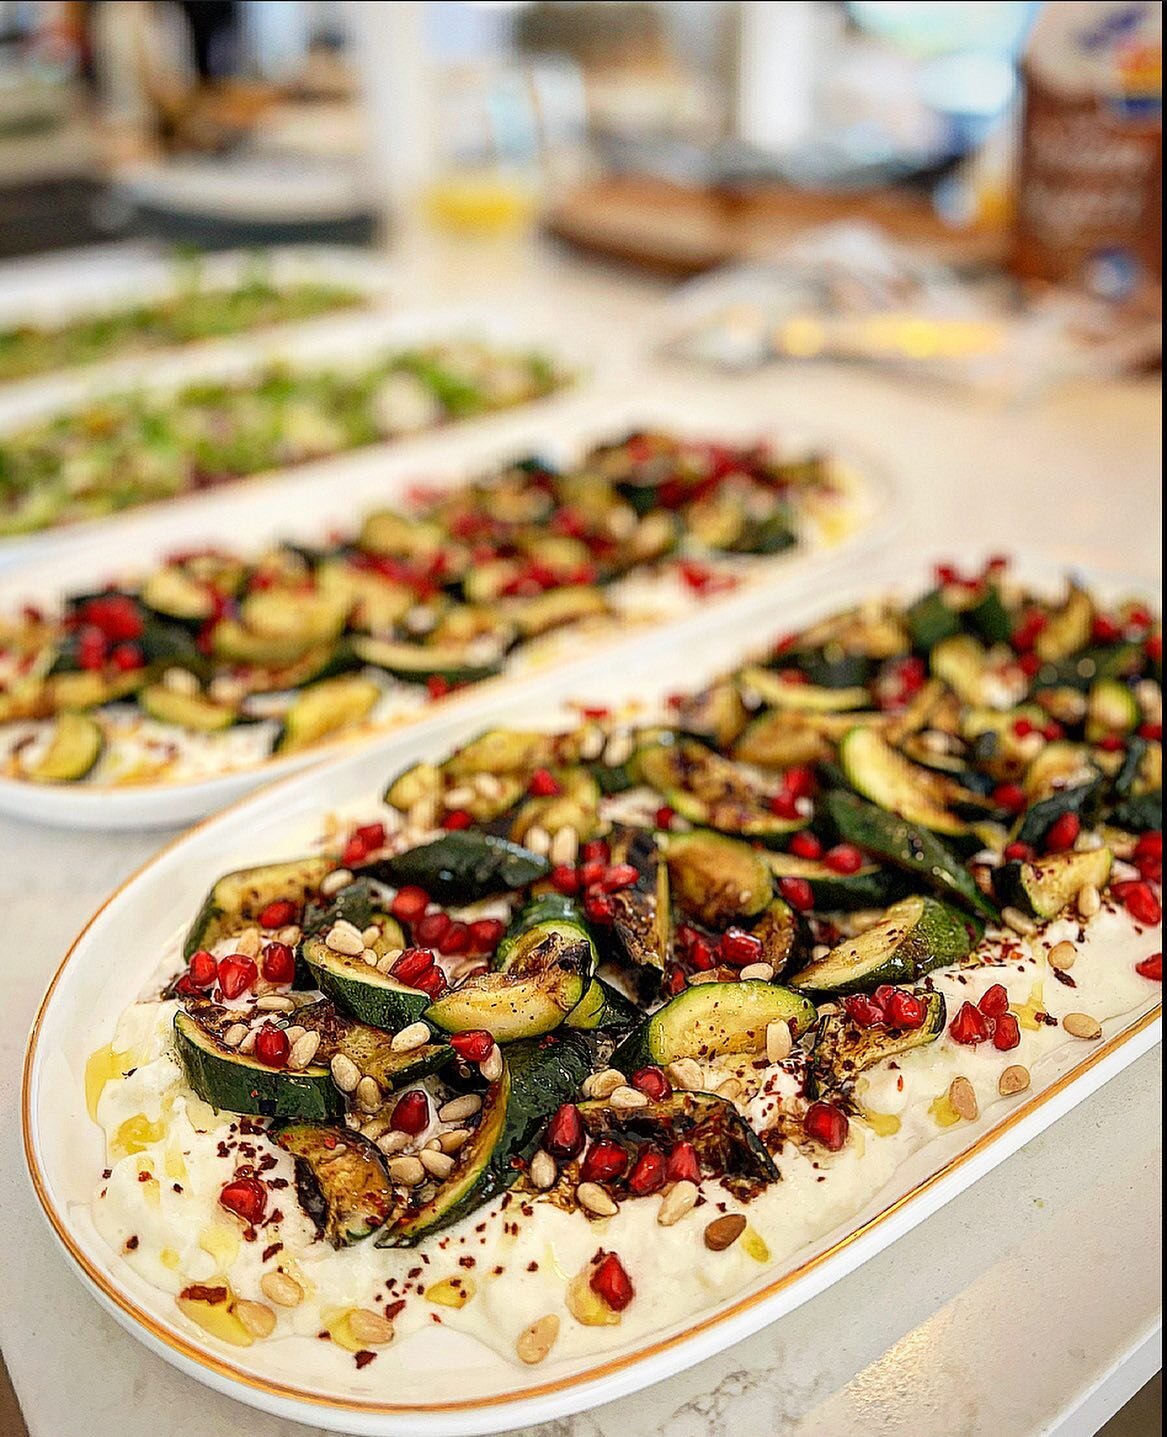 Zesty Grilled Courgettes , Stracciatella Cheese, Pomegranate &amp; Pine Nuts 🤤🌱🤩

One of the entr&eacute;e served yesterday for a long lunch 👌🏽

#waihekechef 
#waiheke
#waihekeisland
#privatechef
#plantbased 
#fundining
#lunch 
#instagood